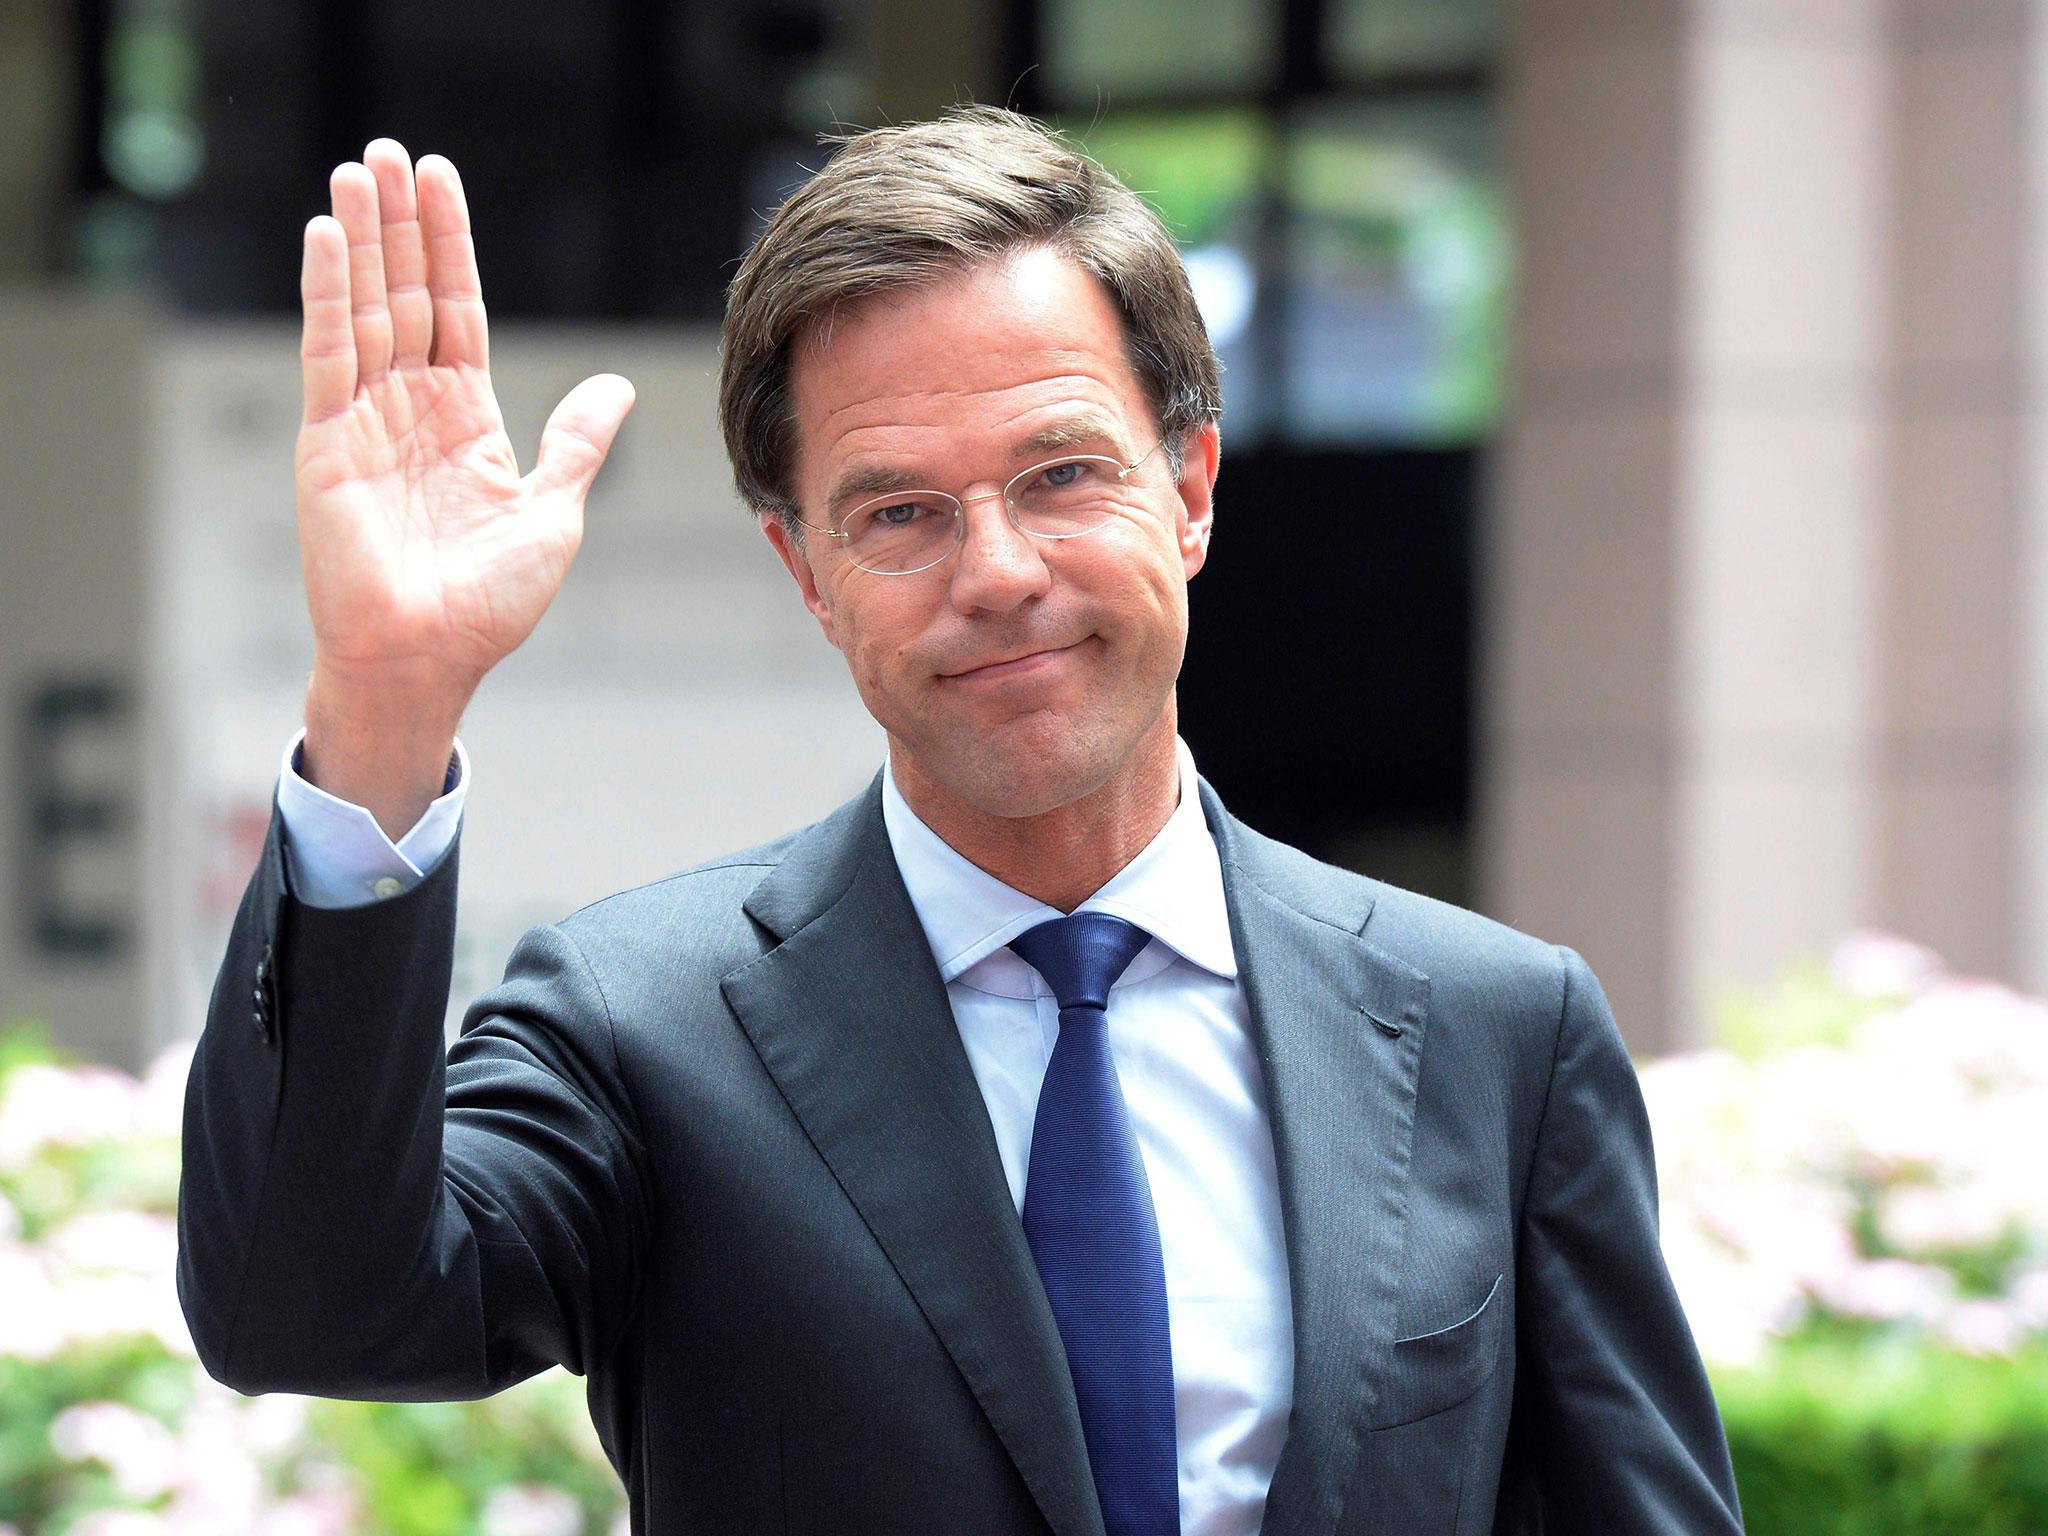 Mark Rutte, leader of centre-right People's Party for Freedom and Democracy, says he understands calls for people who don't integrate to leave the Netherlands